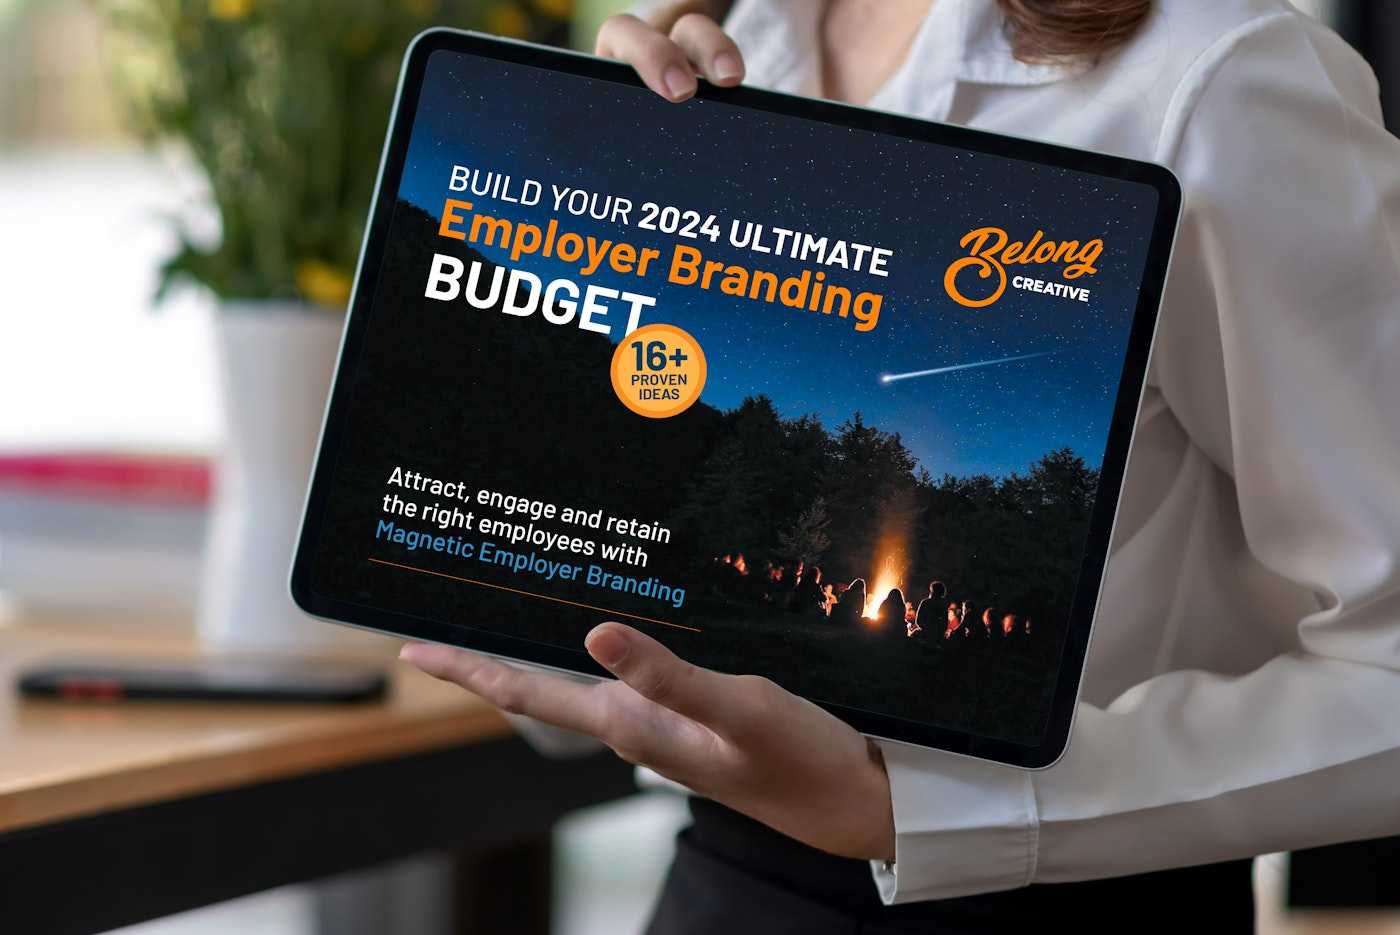 Woman holding ipad with Employer Brand ultimate budget ebook